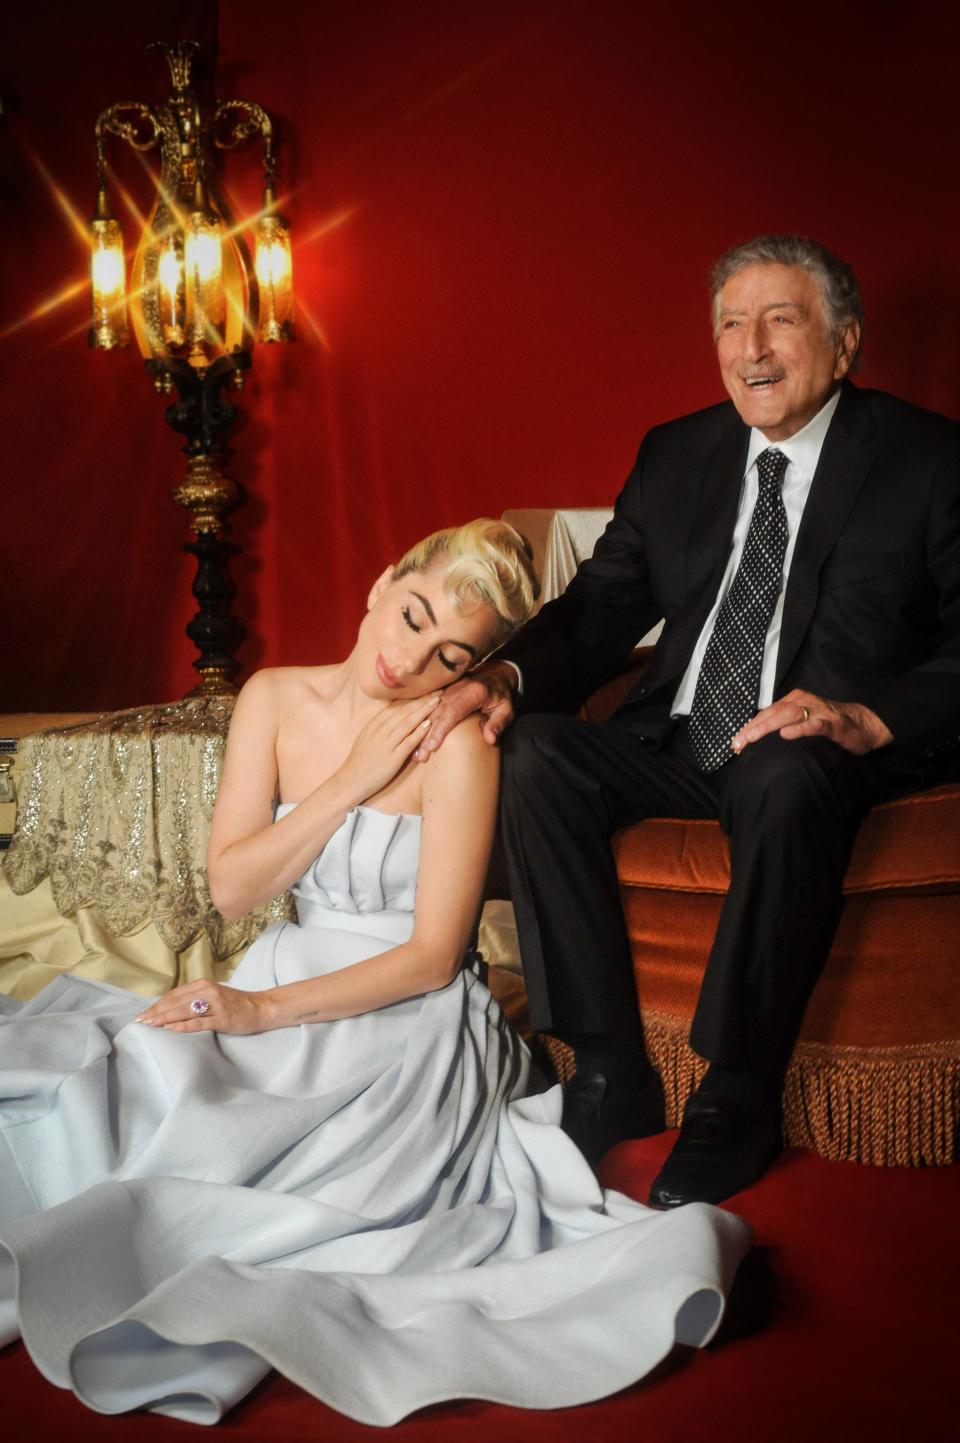 Lady Gaga and Tony Bennett became an inescapable artistic couple with their 2014 album "Cheek to Cheek" and 2021's "Love for Sale."